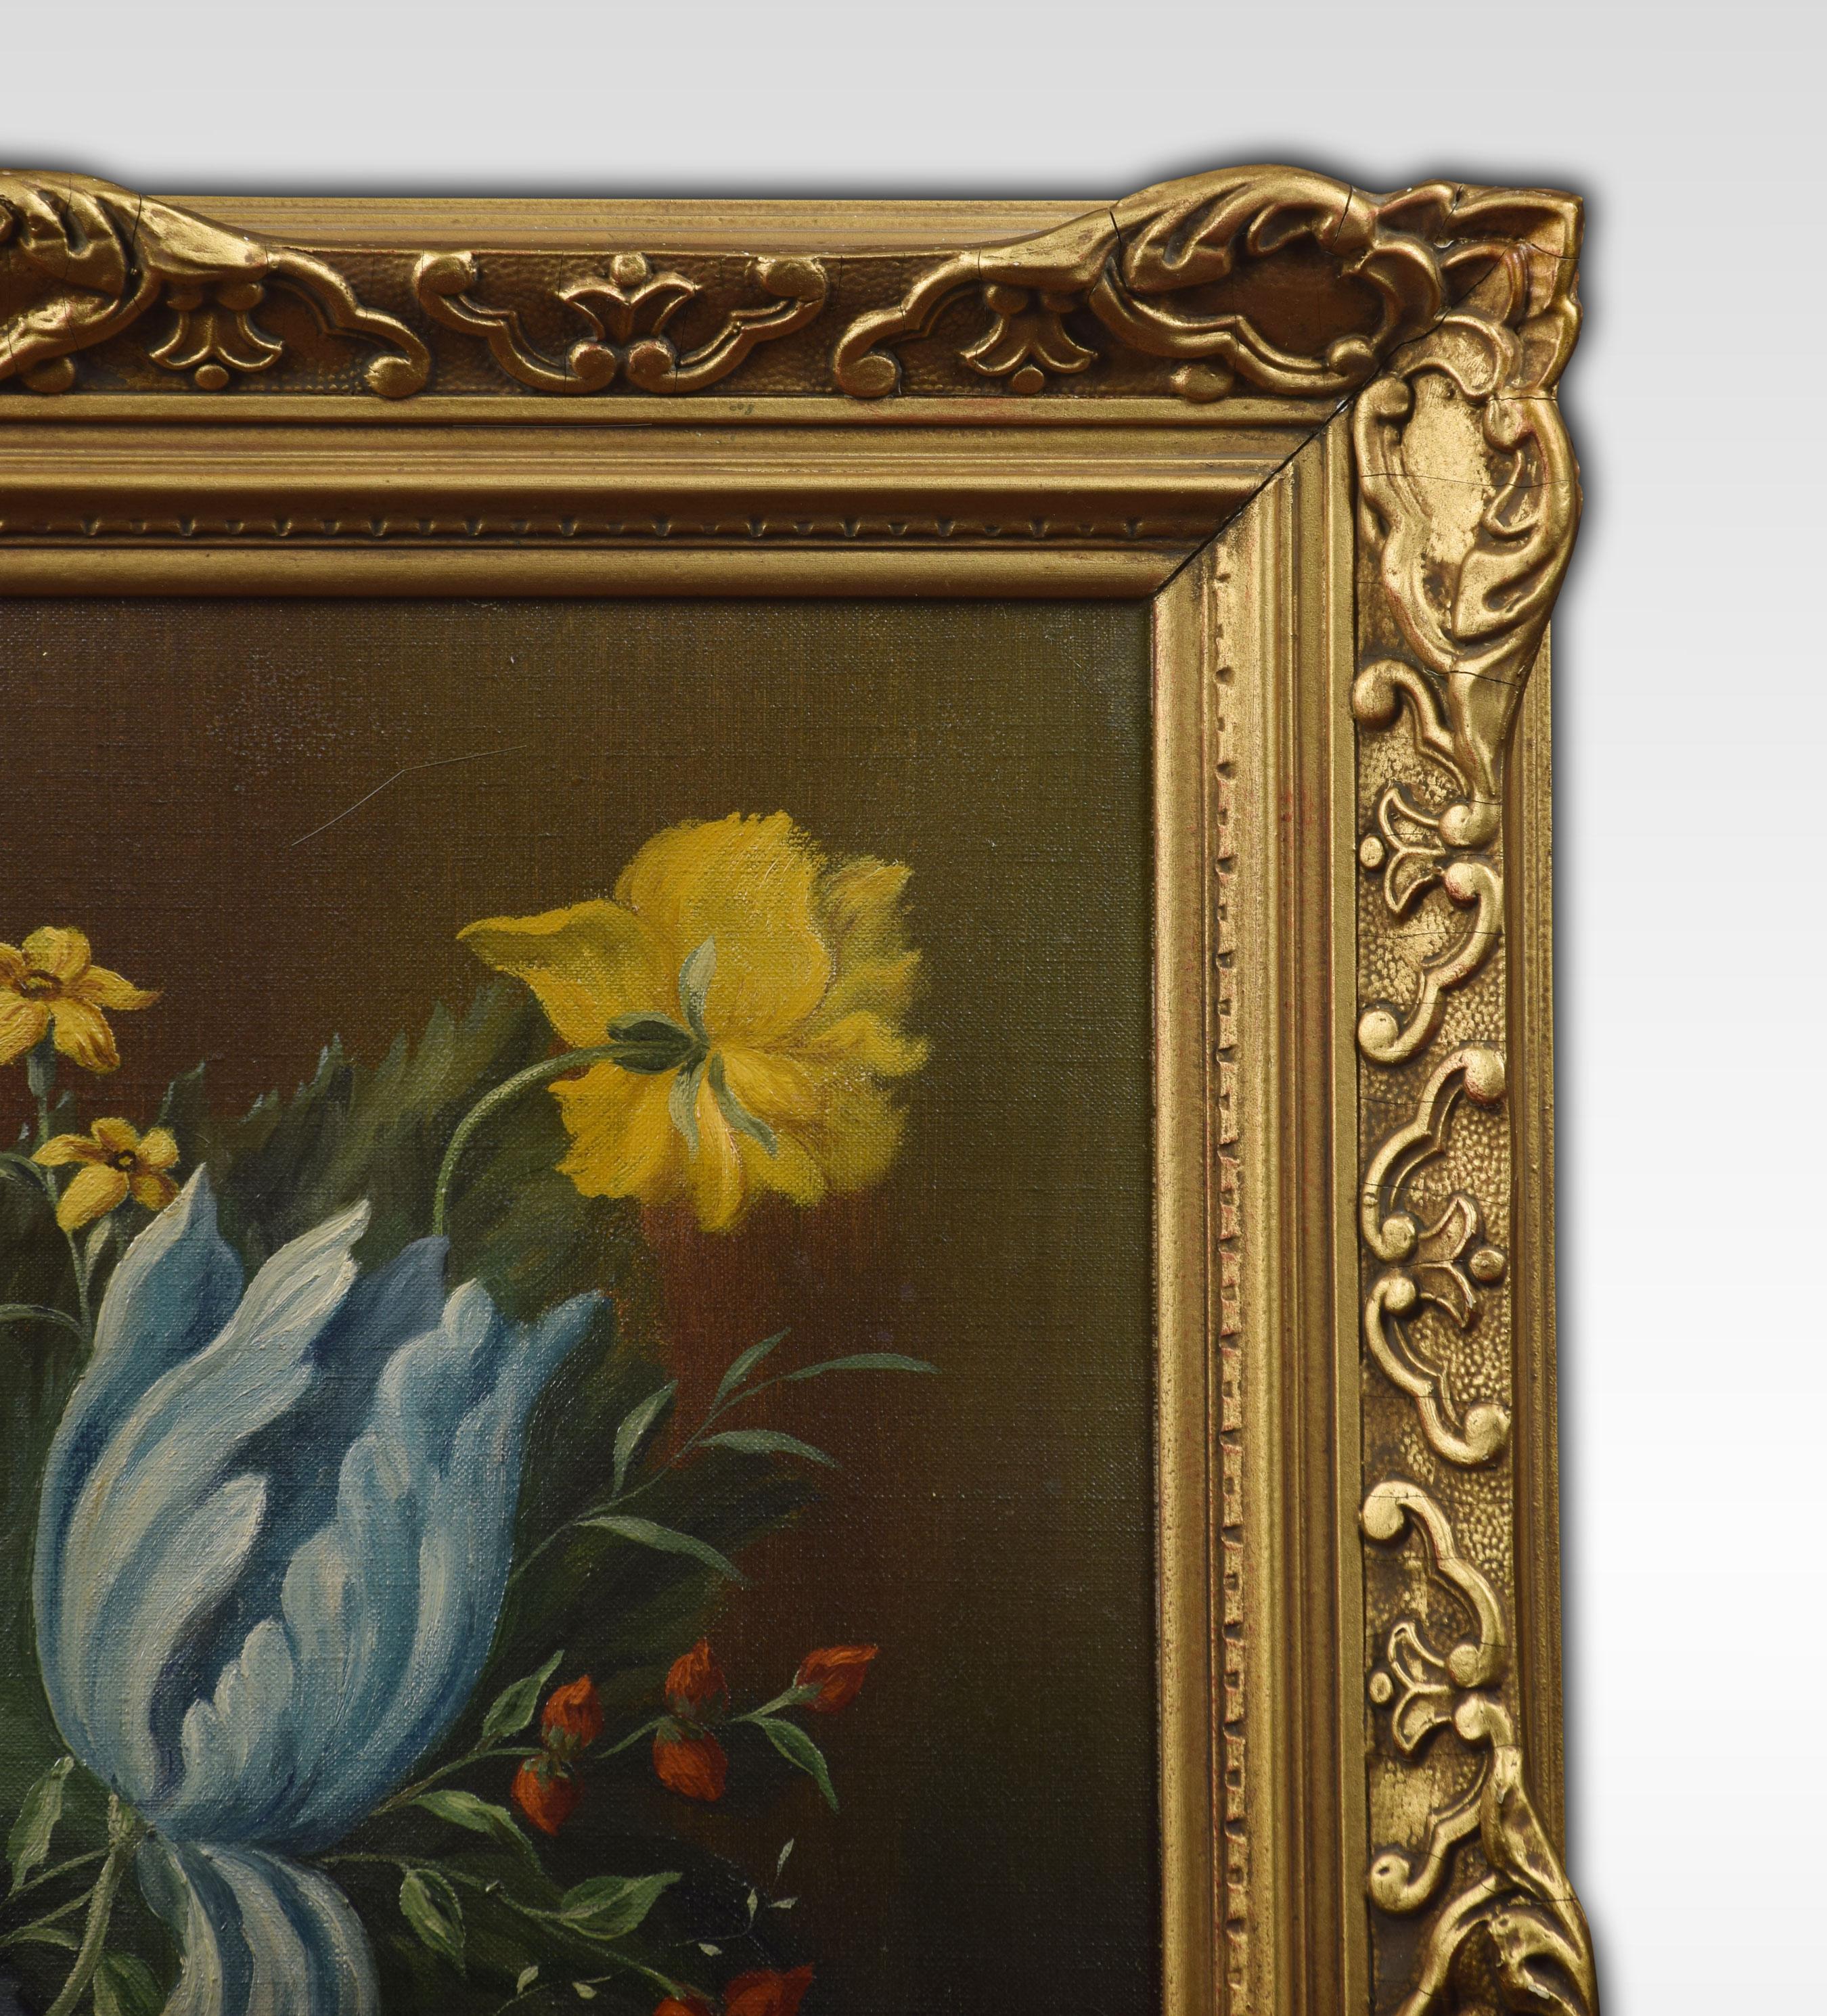 Still life of flowers signed J van Neesen encased in gilt frame.
Dimensions
Height 30.5 inches
Width 26 inches
Depth 1.5 inches.